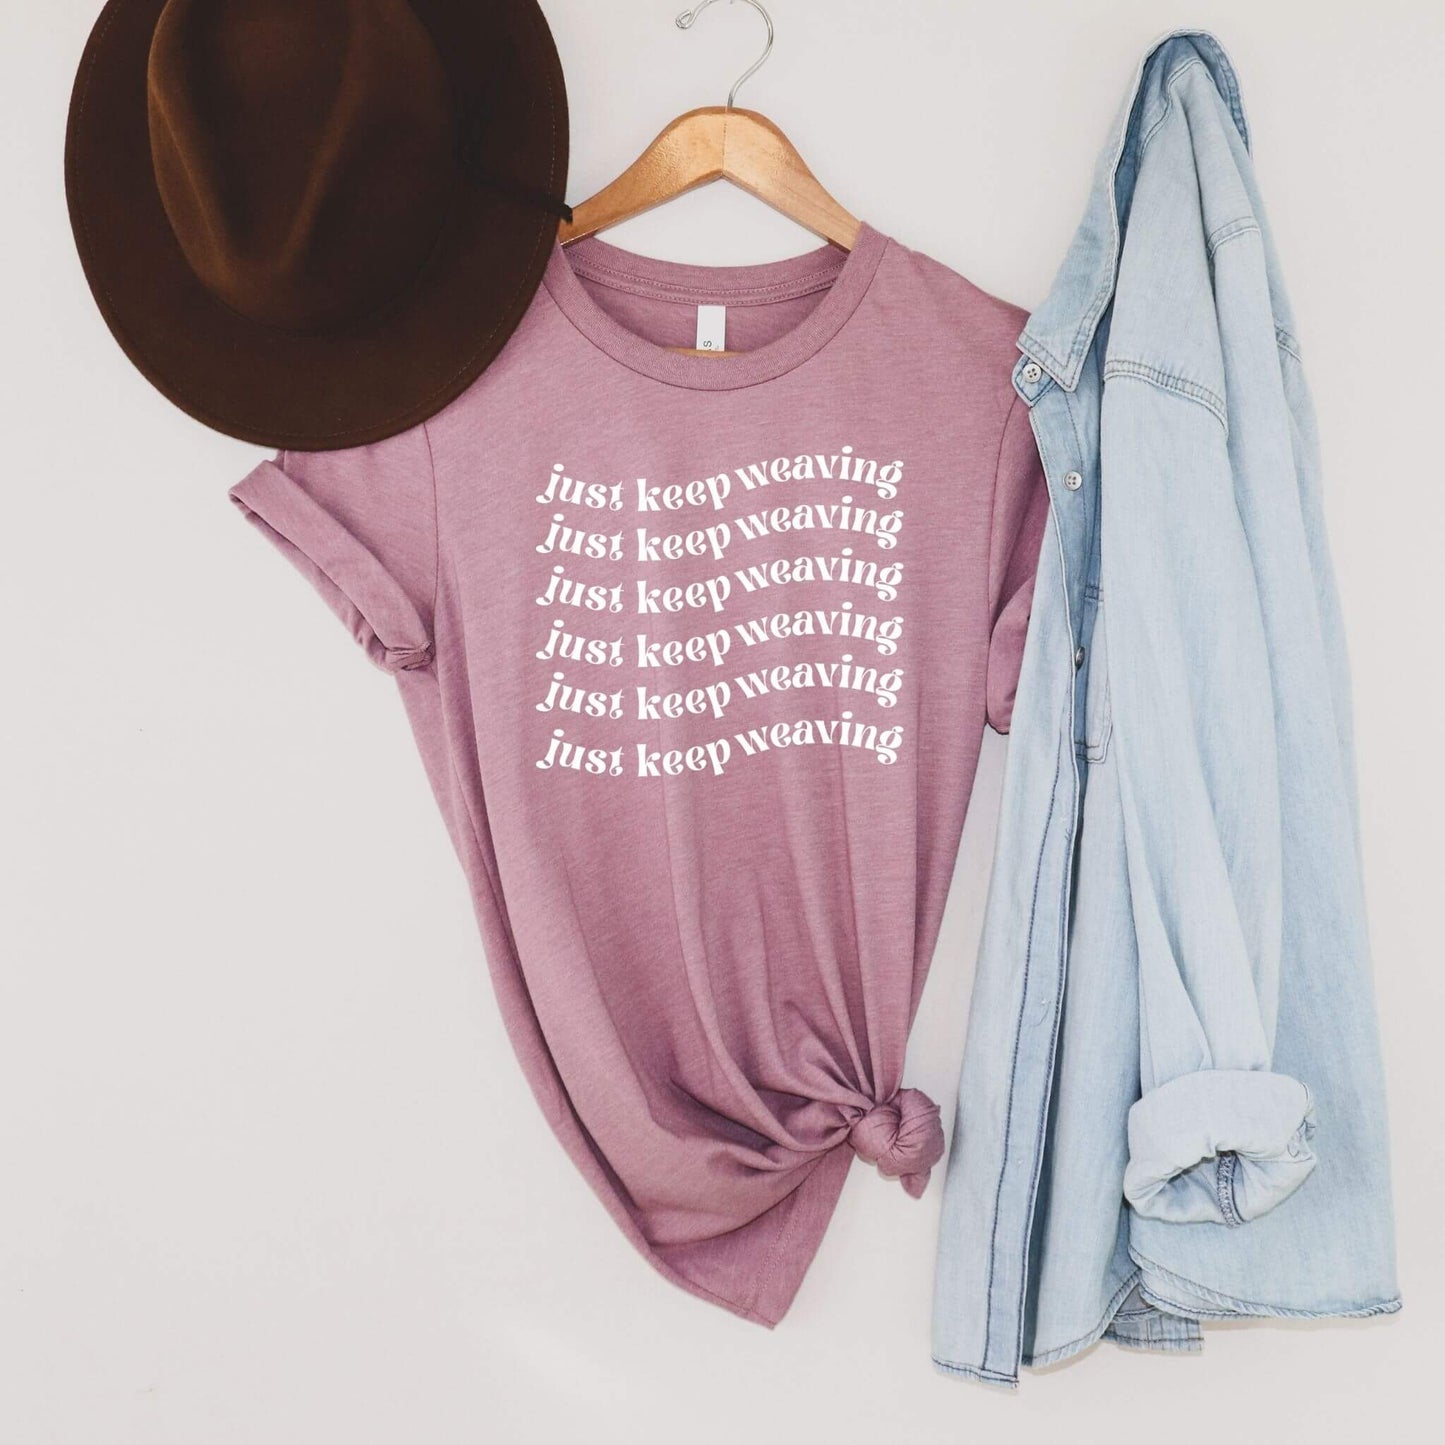 light purple t-shirt with words just keep weaving on it